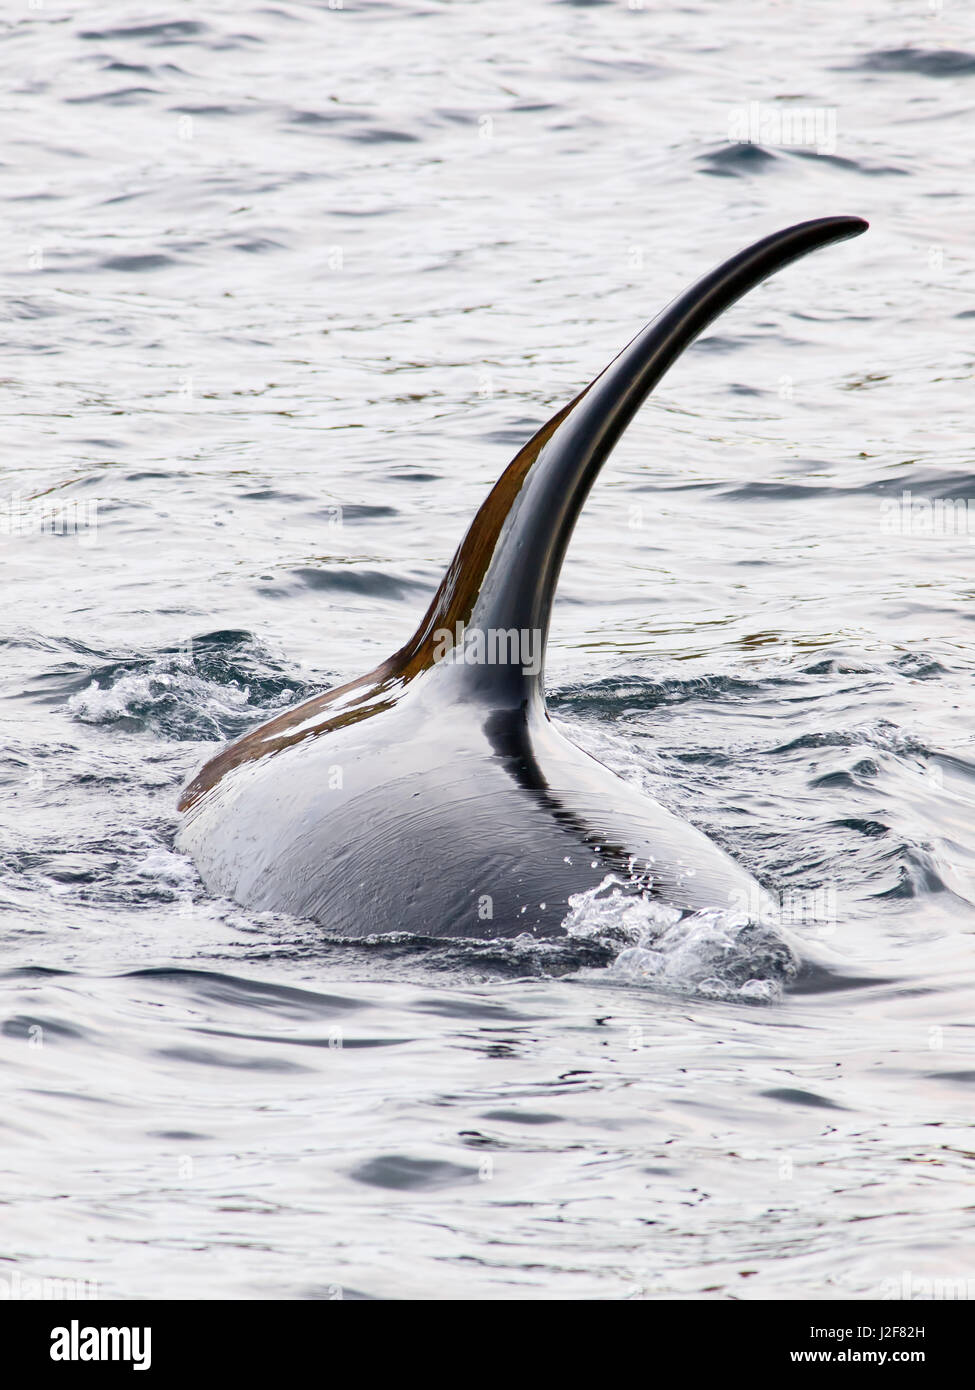 Orca's in the North Sea. Seldomly photographed in the North Sea. Orcas (killer whales) can be identified on an individual basis due to natural markings and differences in fin shape. Orcas have an obvious dorsal fin that varies in shape and size, often with distinctive nicks or scars. The saddle patch also varies from individual to individual in shape, size, color and scarring Stock Photo